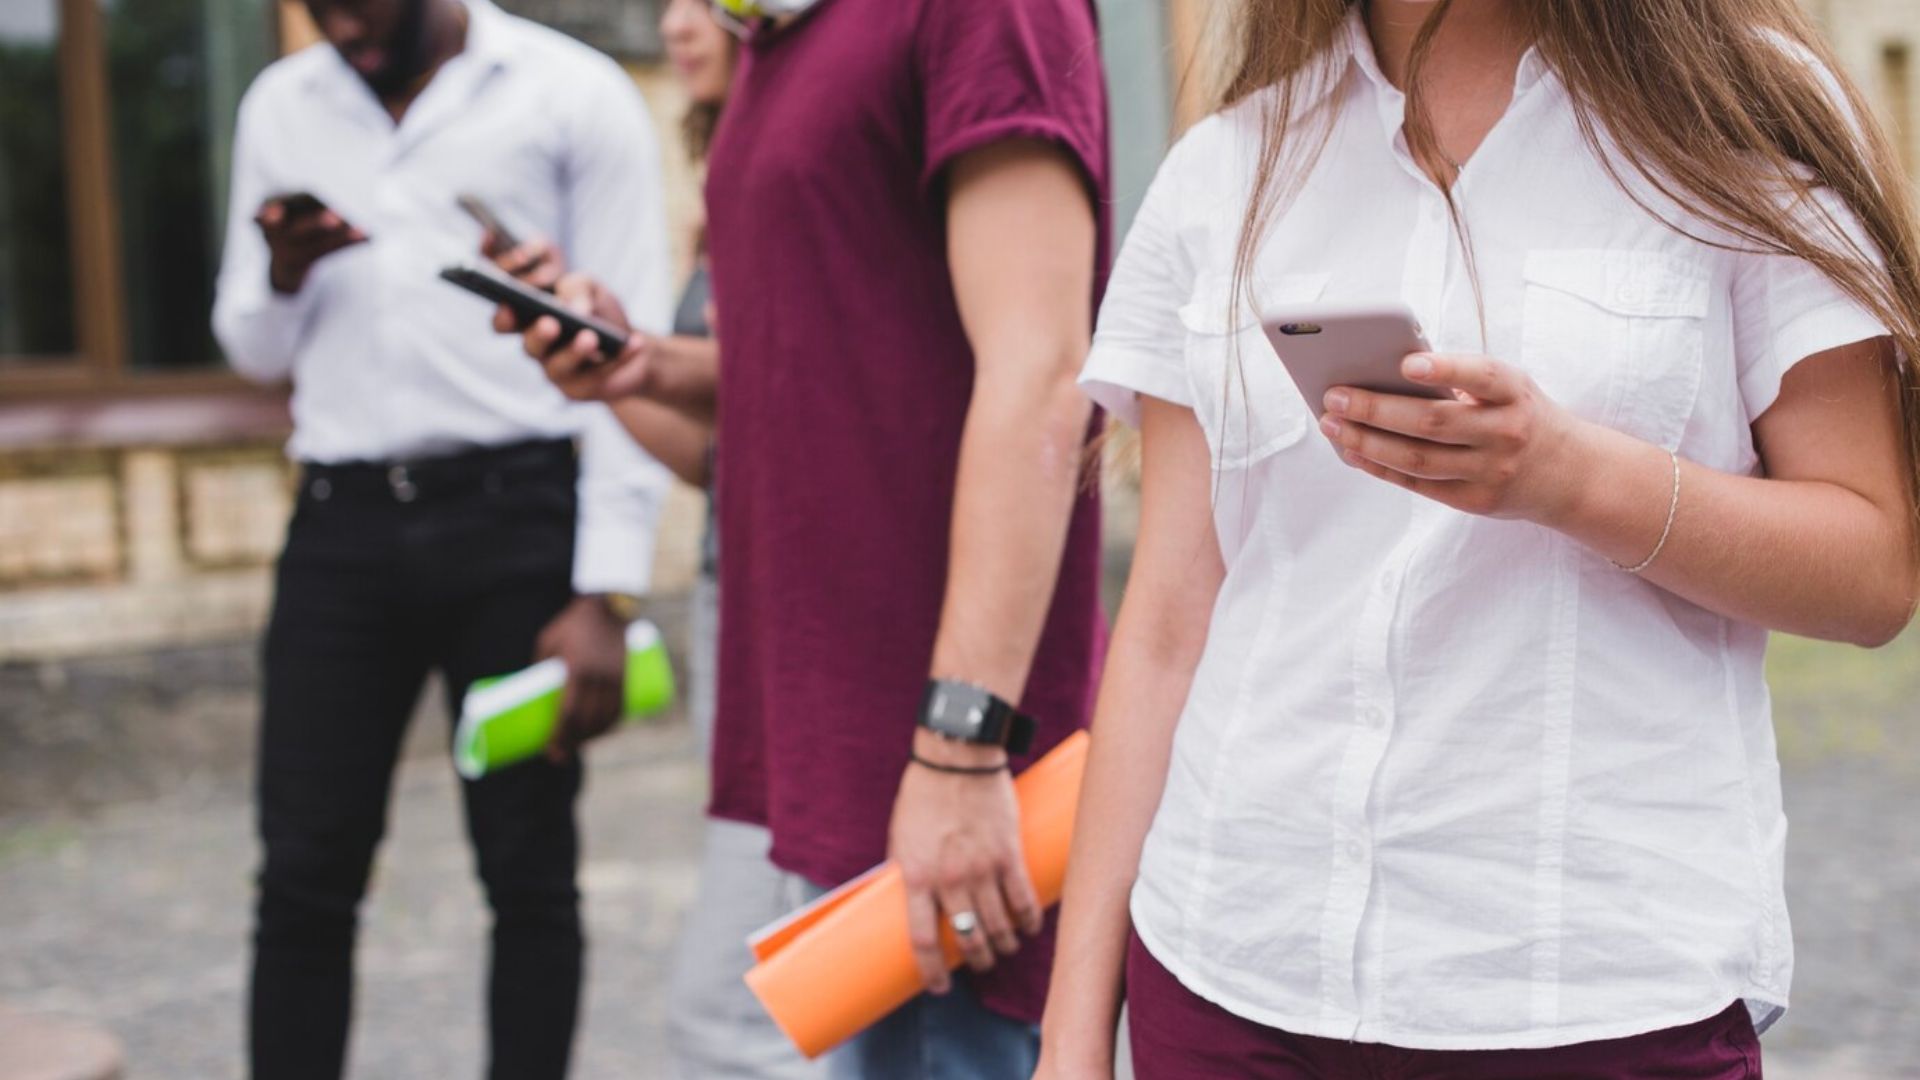 people standing holding smartphones and notebooks